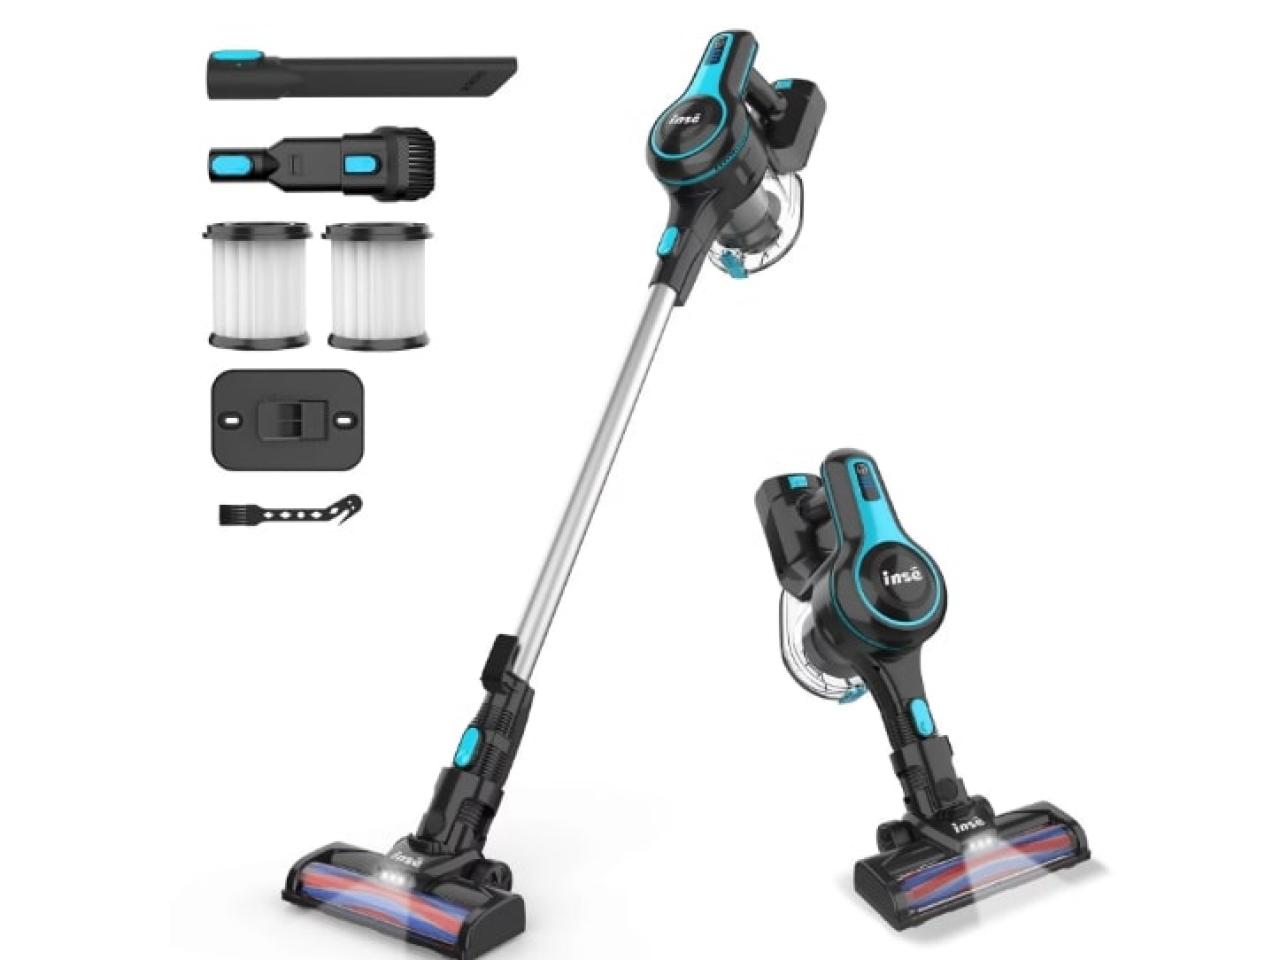 Black & Decker 36V Max Lithium Stick Vacuum with ORA Technology review:  Tangles and tedium from this mediocre cleaner - CNET